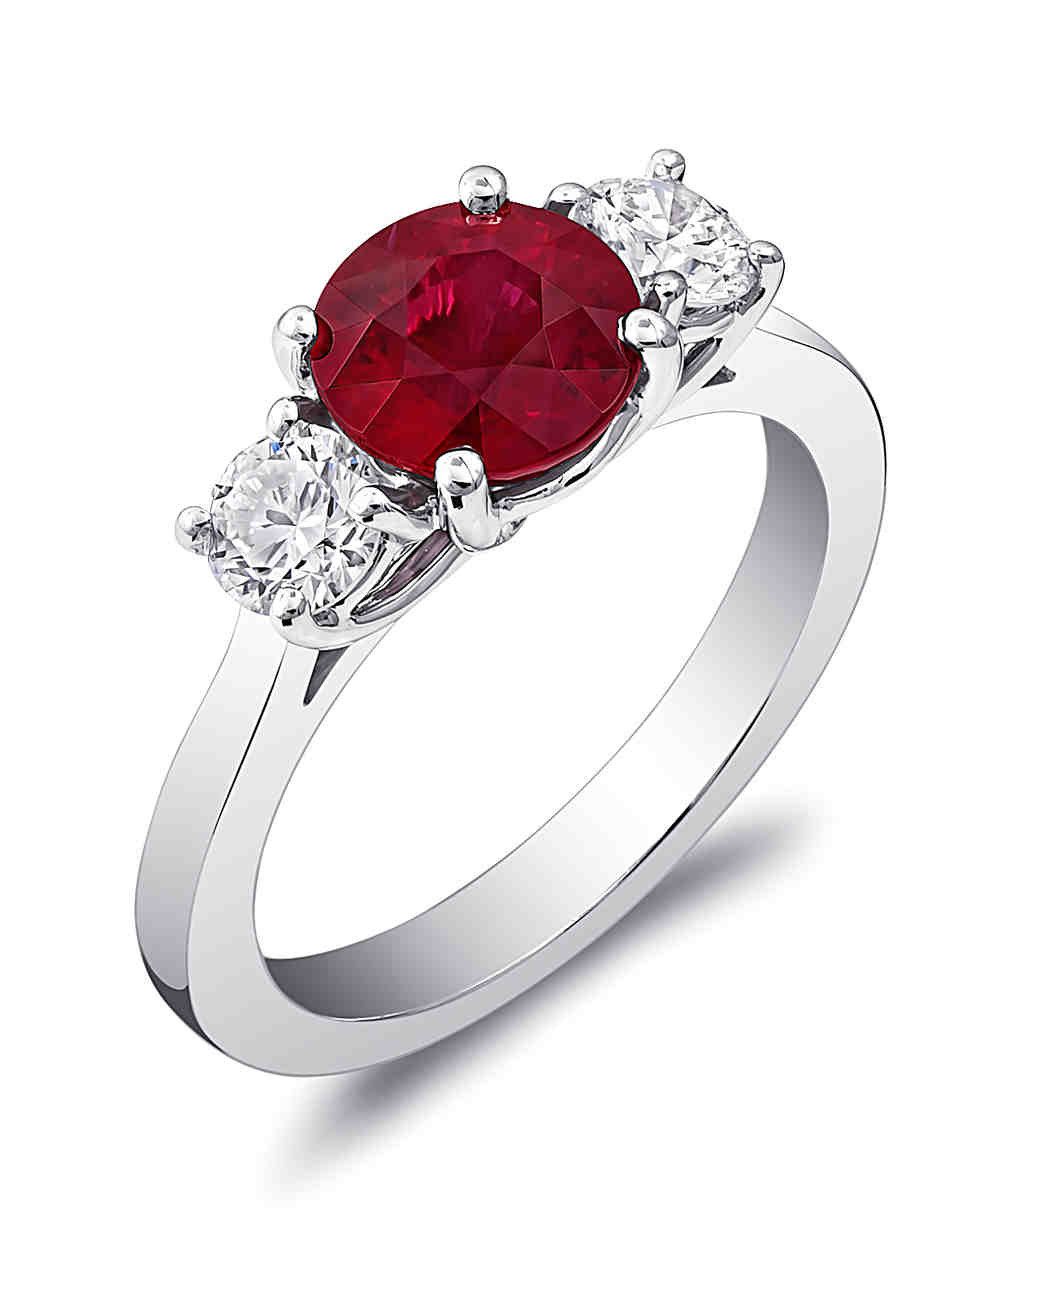 Diamond And Ruby Engagement Rings
 34 Royal Ruby Engagement Rings